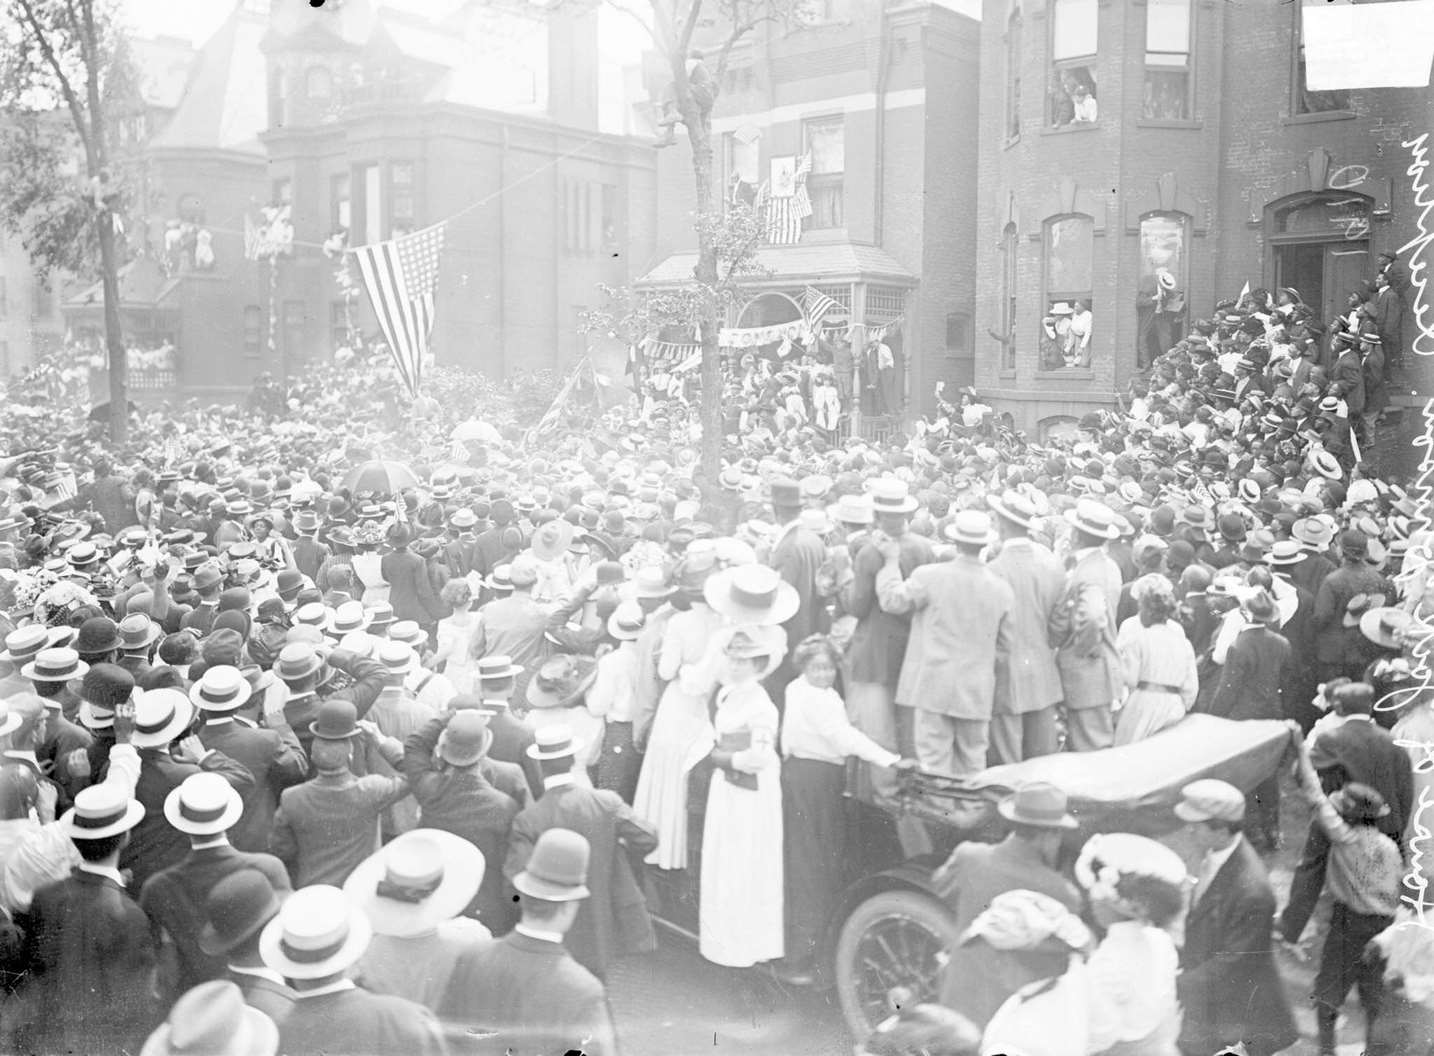 A large crowd of people gathering on the street in front of a house where Jack Johnson's reception was taking place in Chicago, 1910.